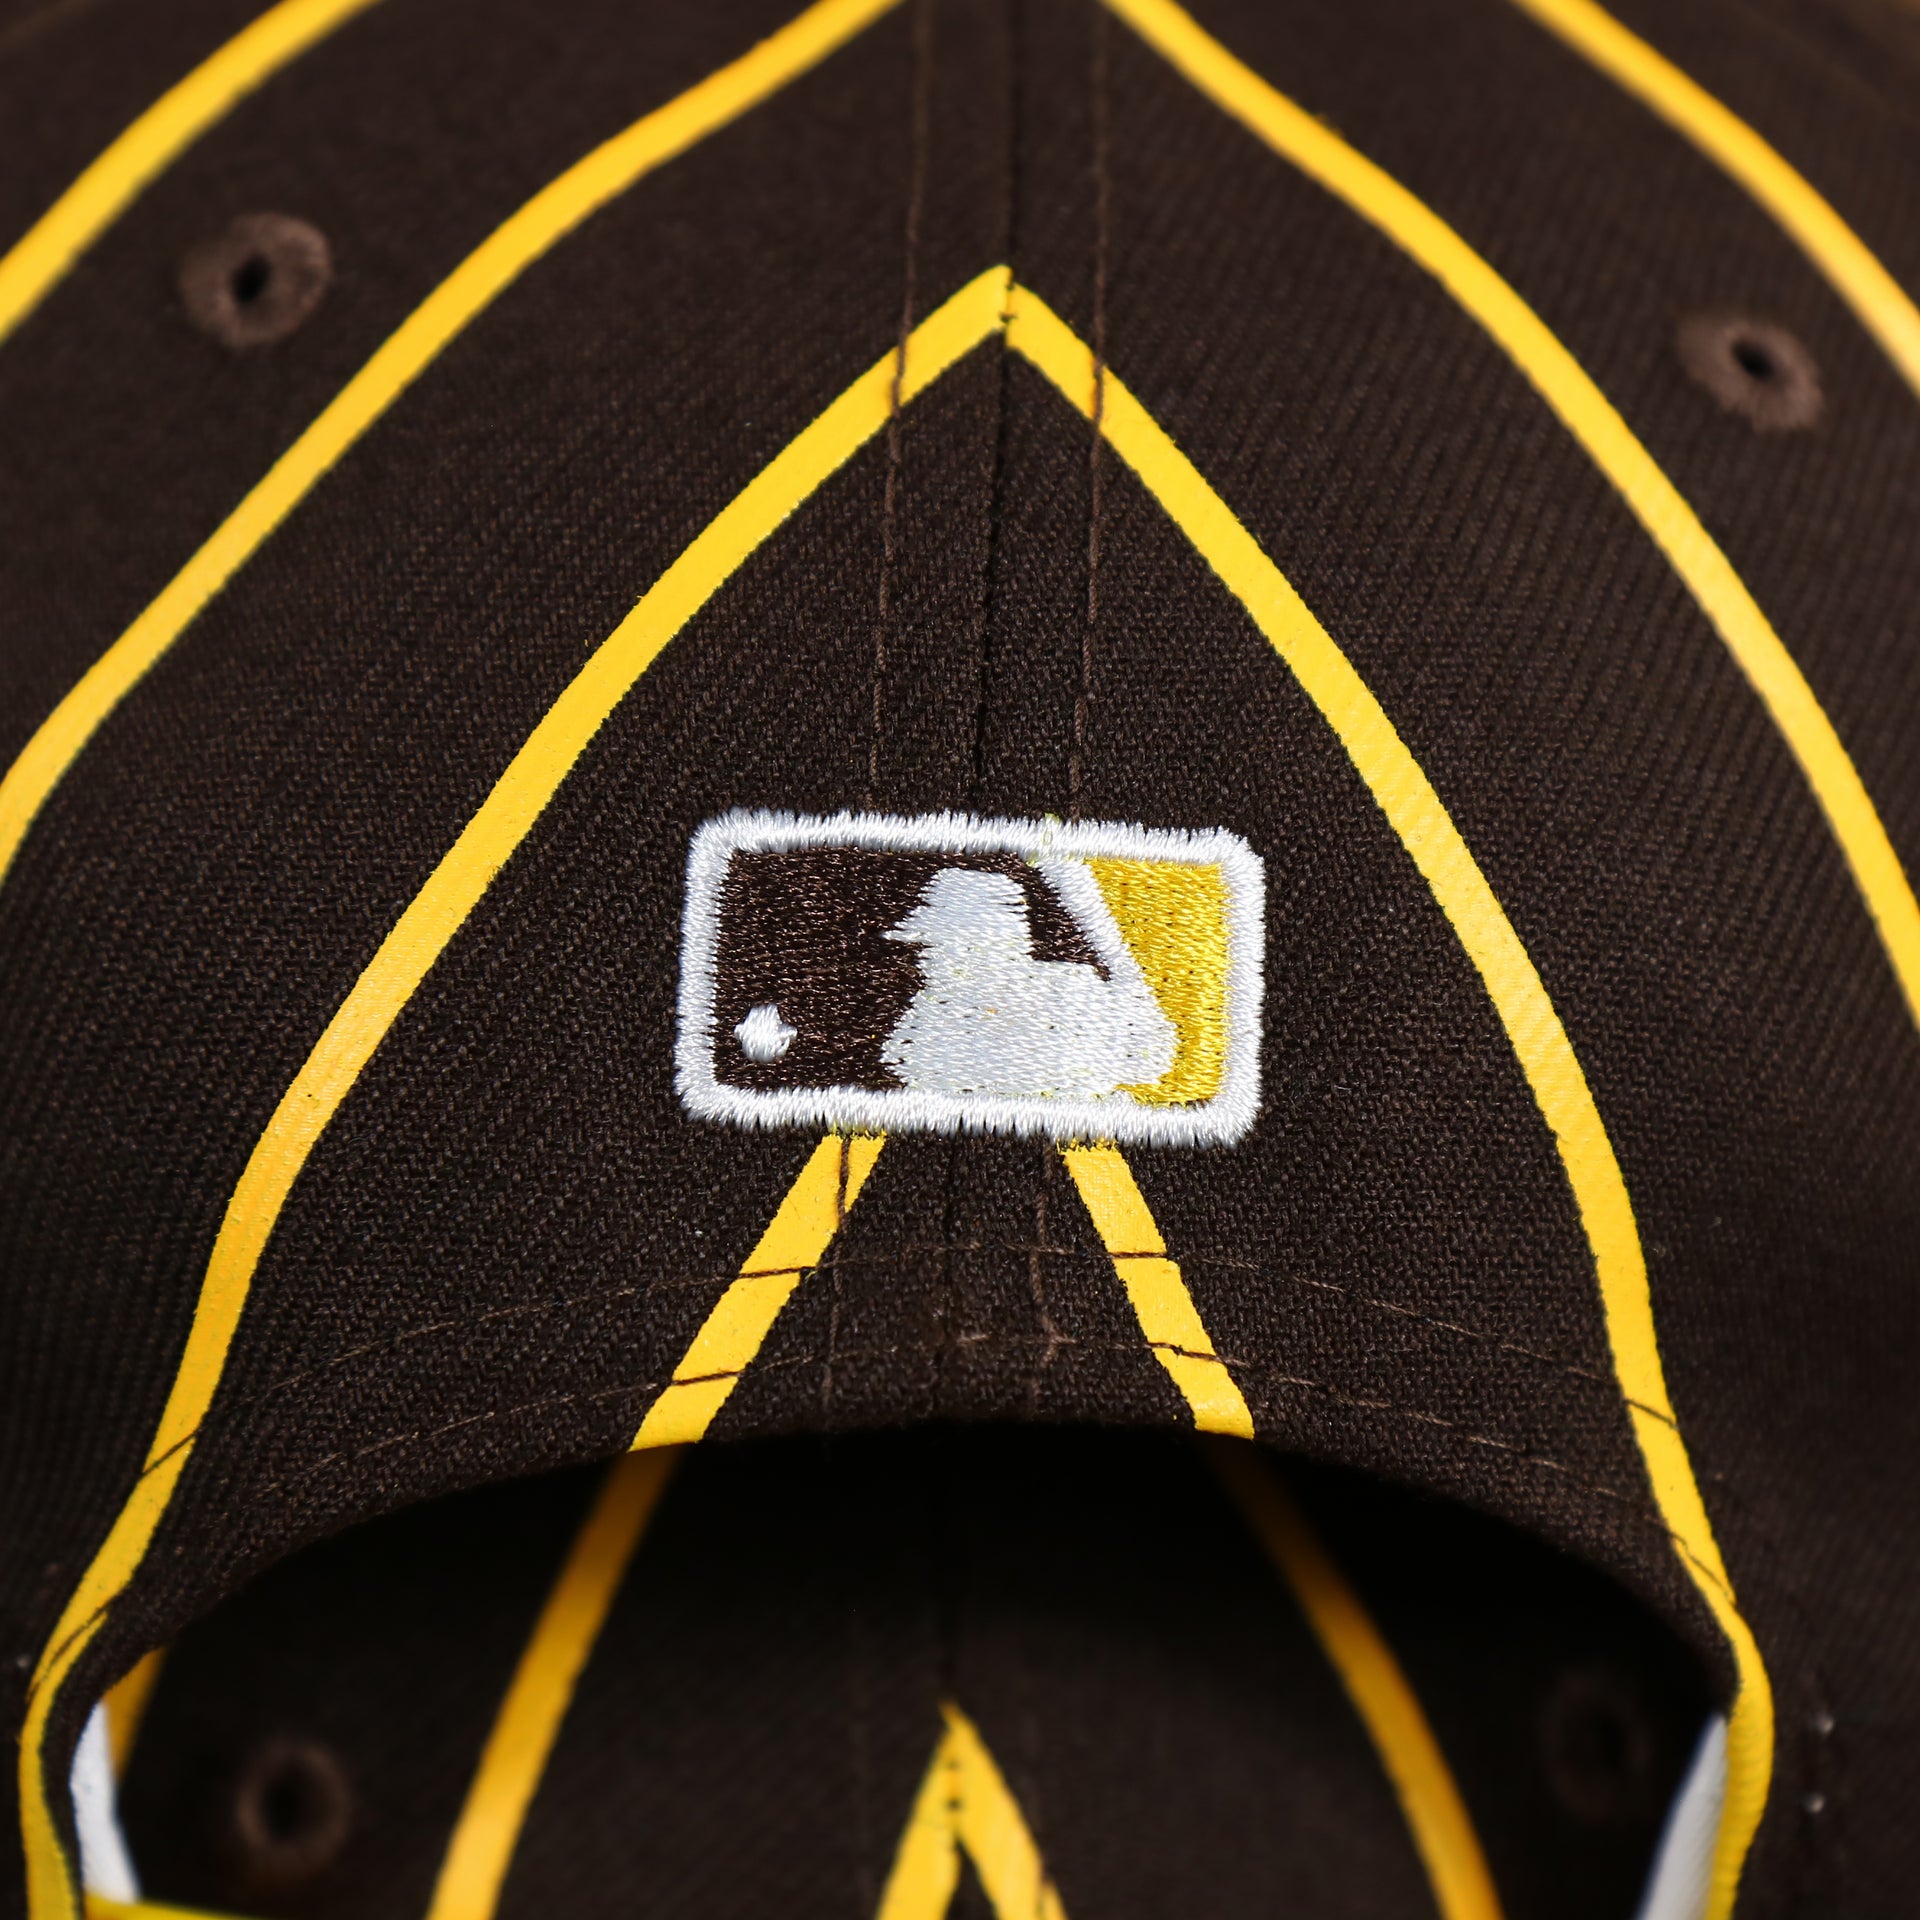 The MLB Batterman Logo Embroidered on the San Diego Padres City Arch Pinstriped 9Fifty Snapback Cap | Brown 9Fifty Cap